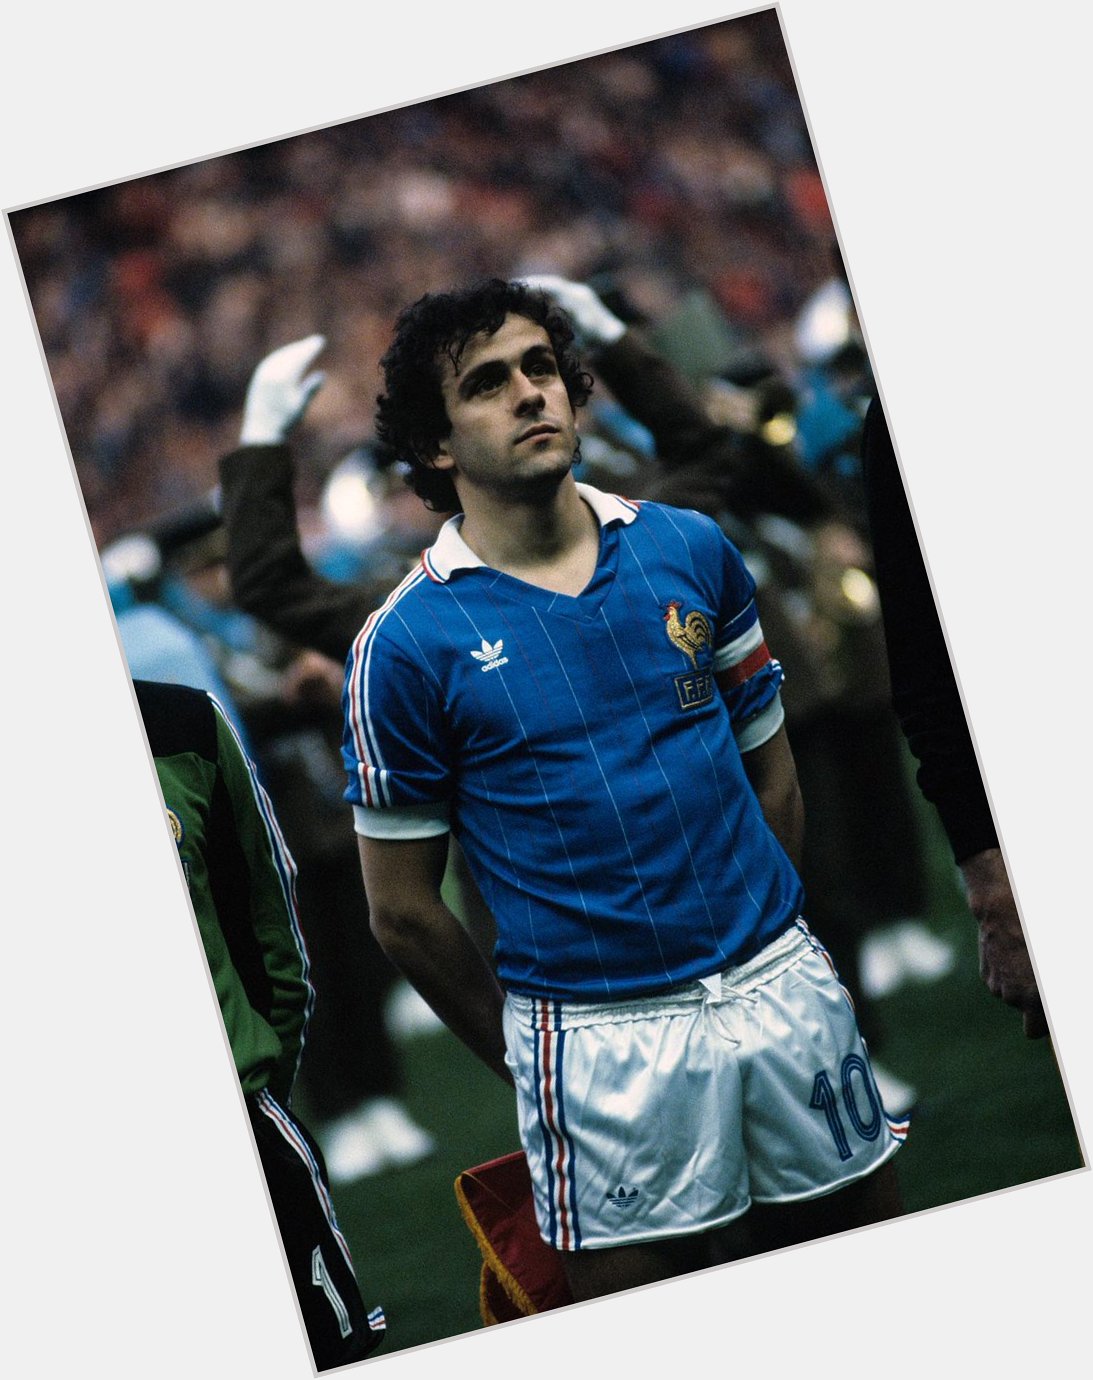 Happy birthday, Michel Platini!
Thank you for the memories on the pitch and the dedication off it!
Cheers! :) 